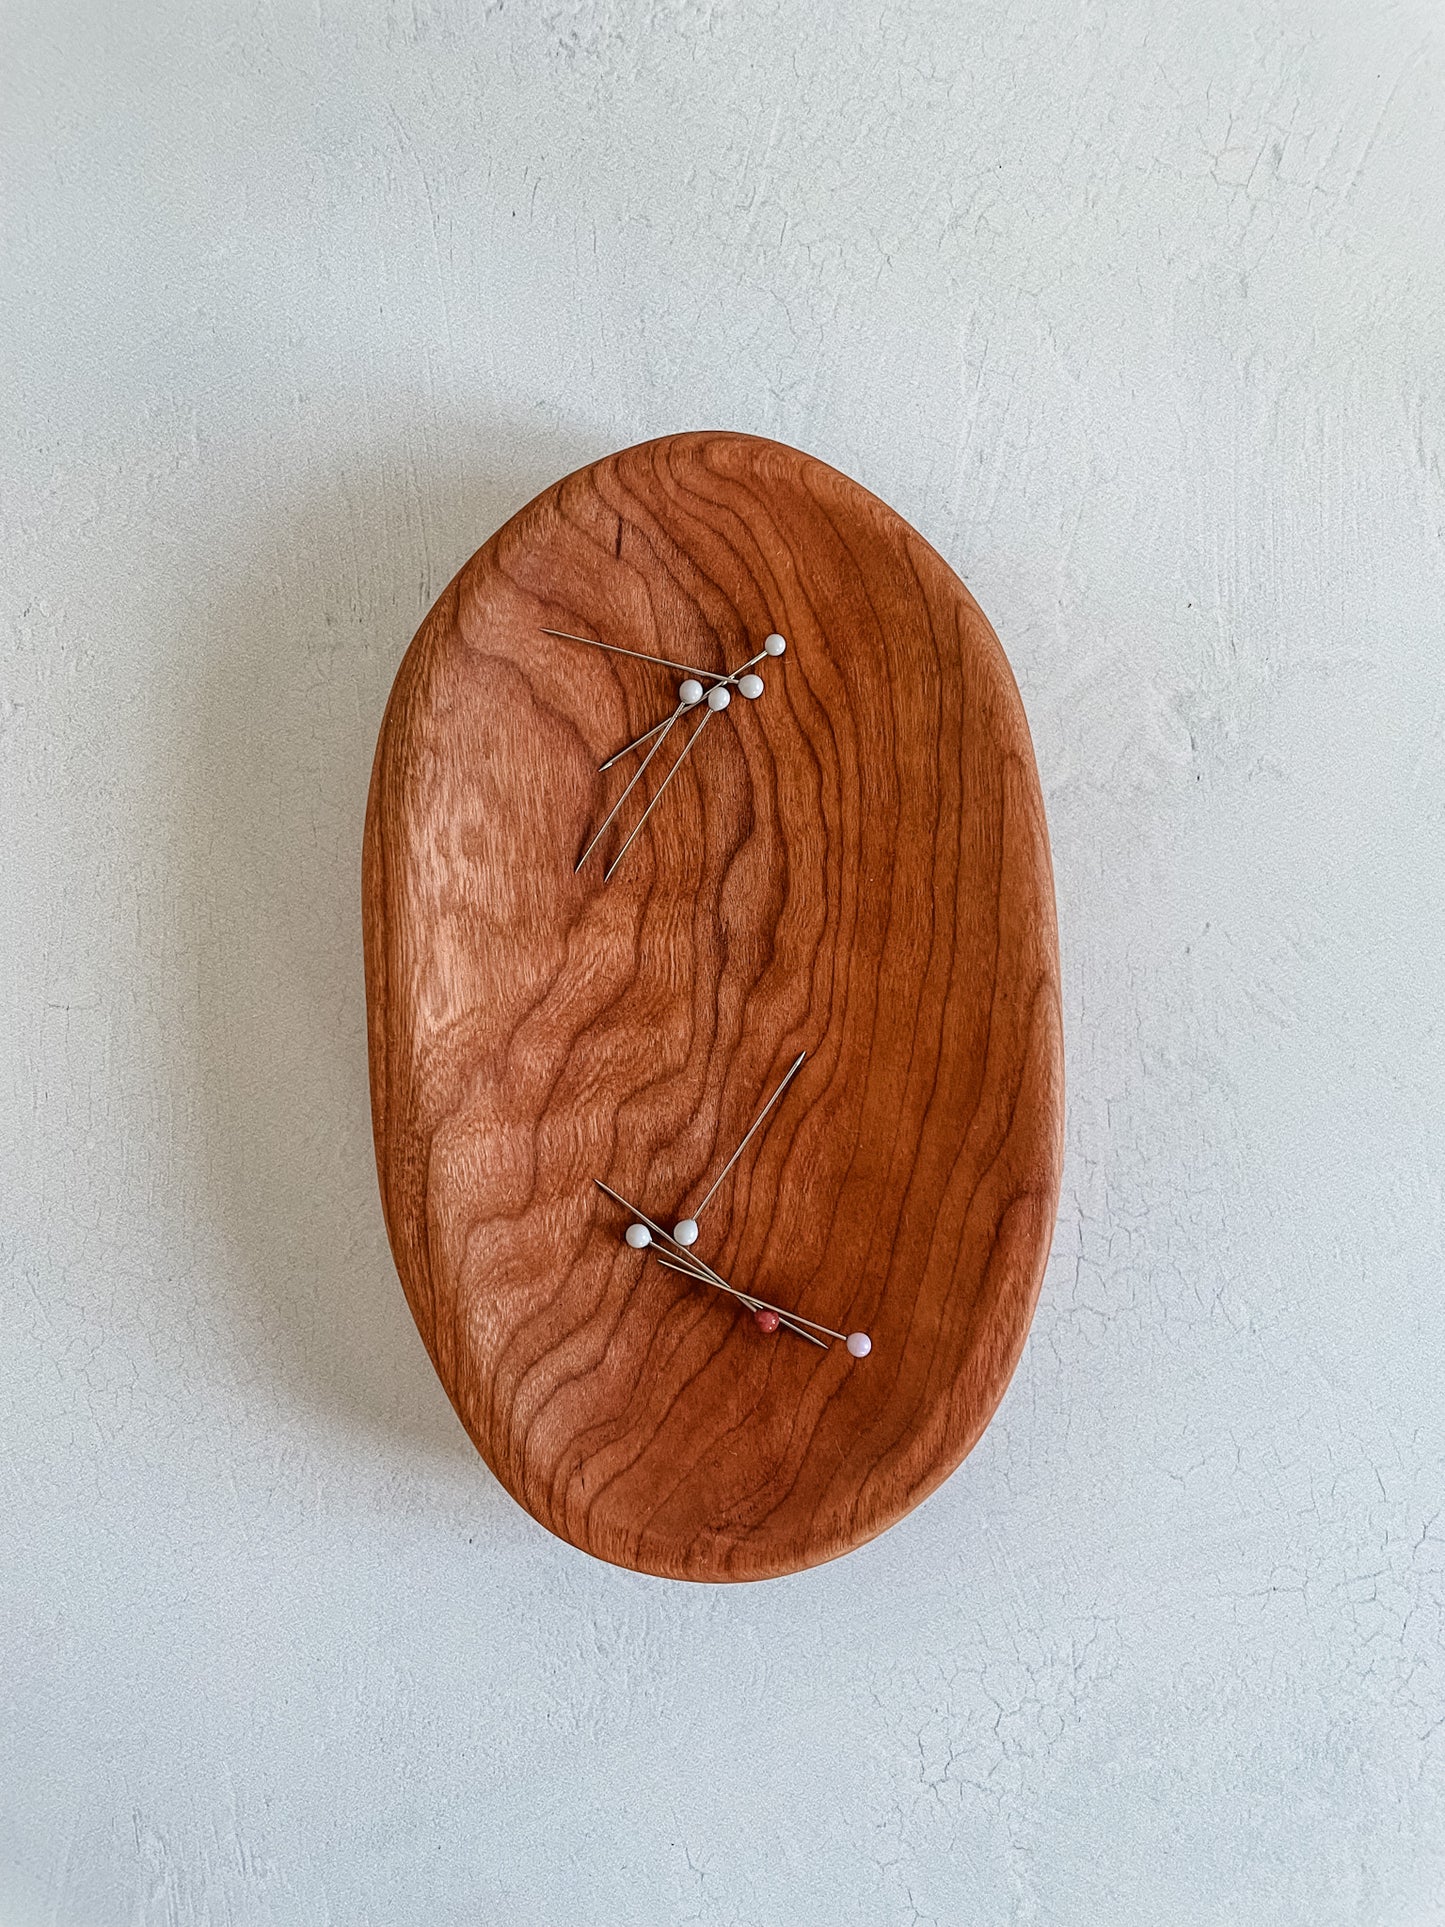 Large River Rock Wooden Pin Holders – Valley House Woodworking